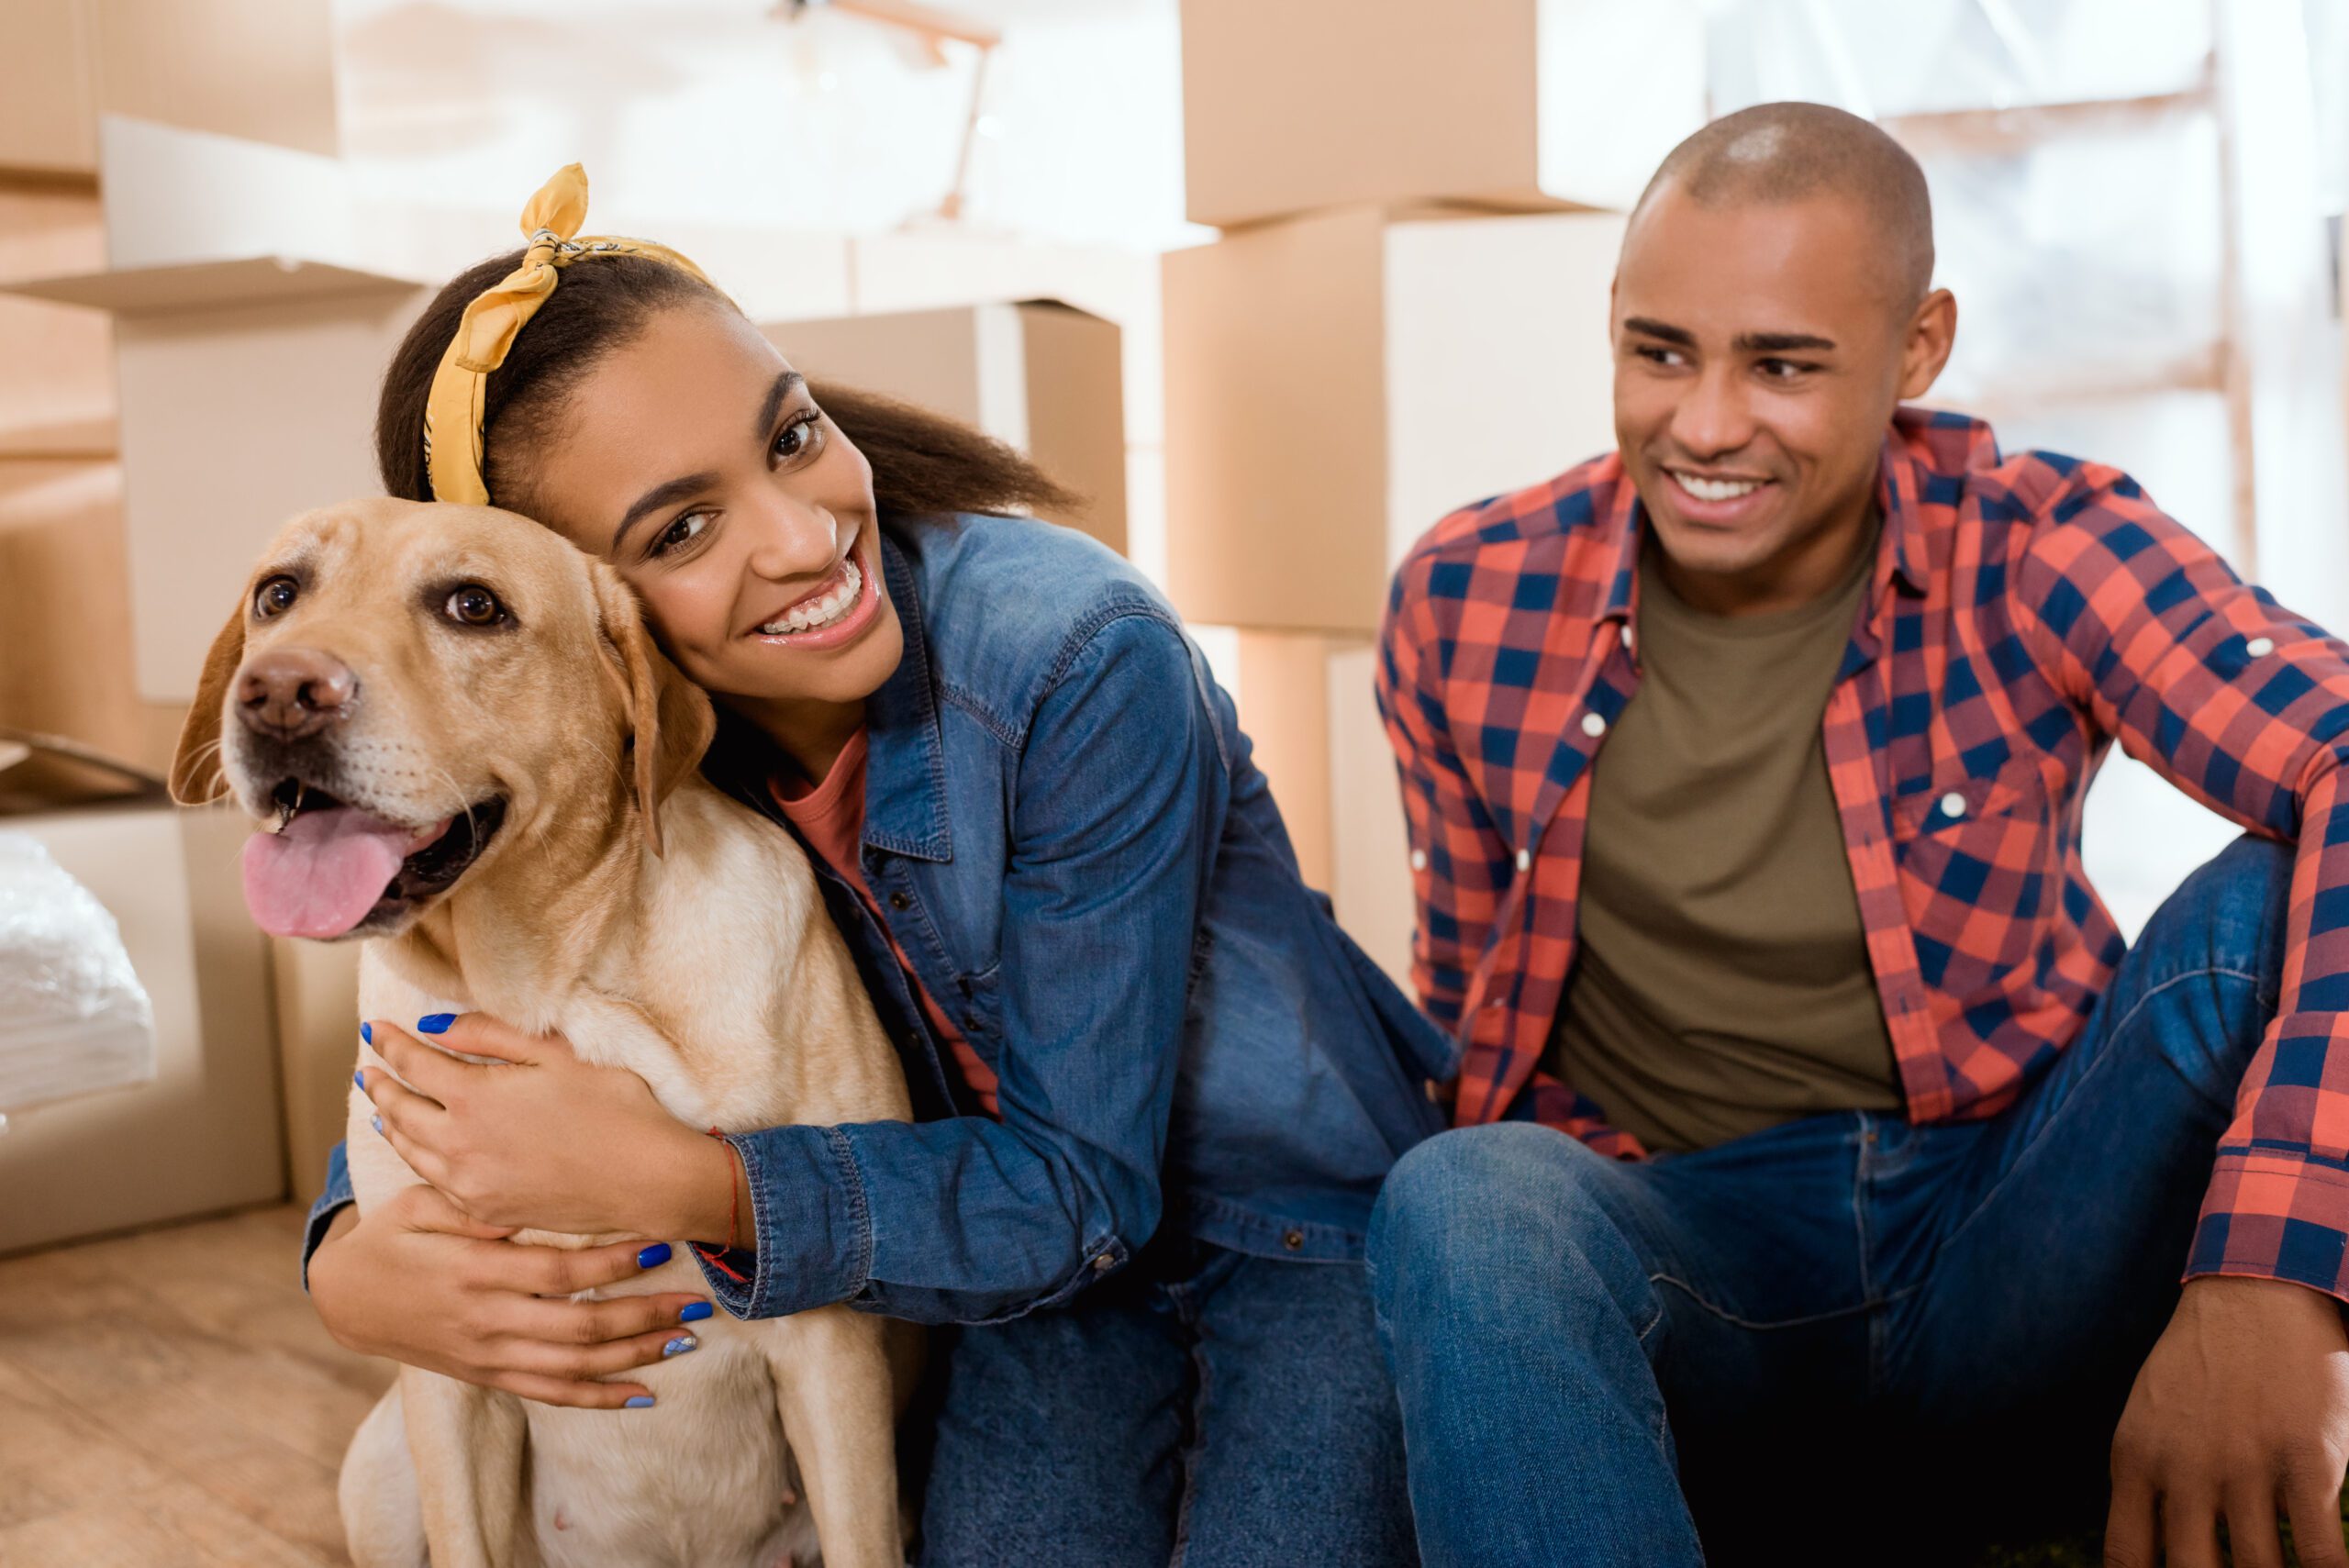 Pet-Friendly Apartments- Creating Space for Furry Friends in Small Homes